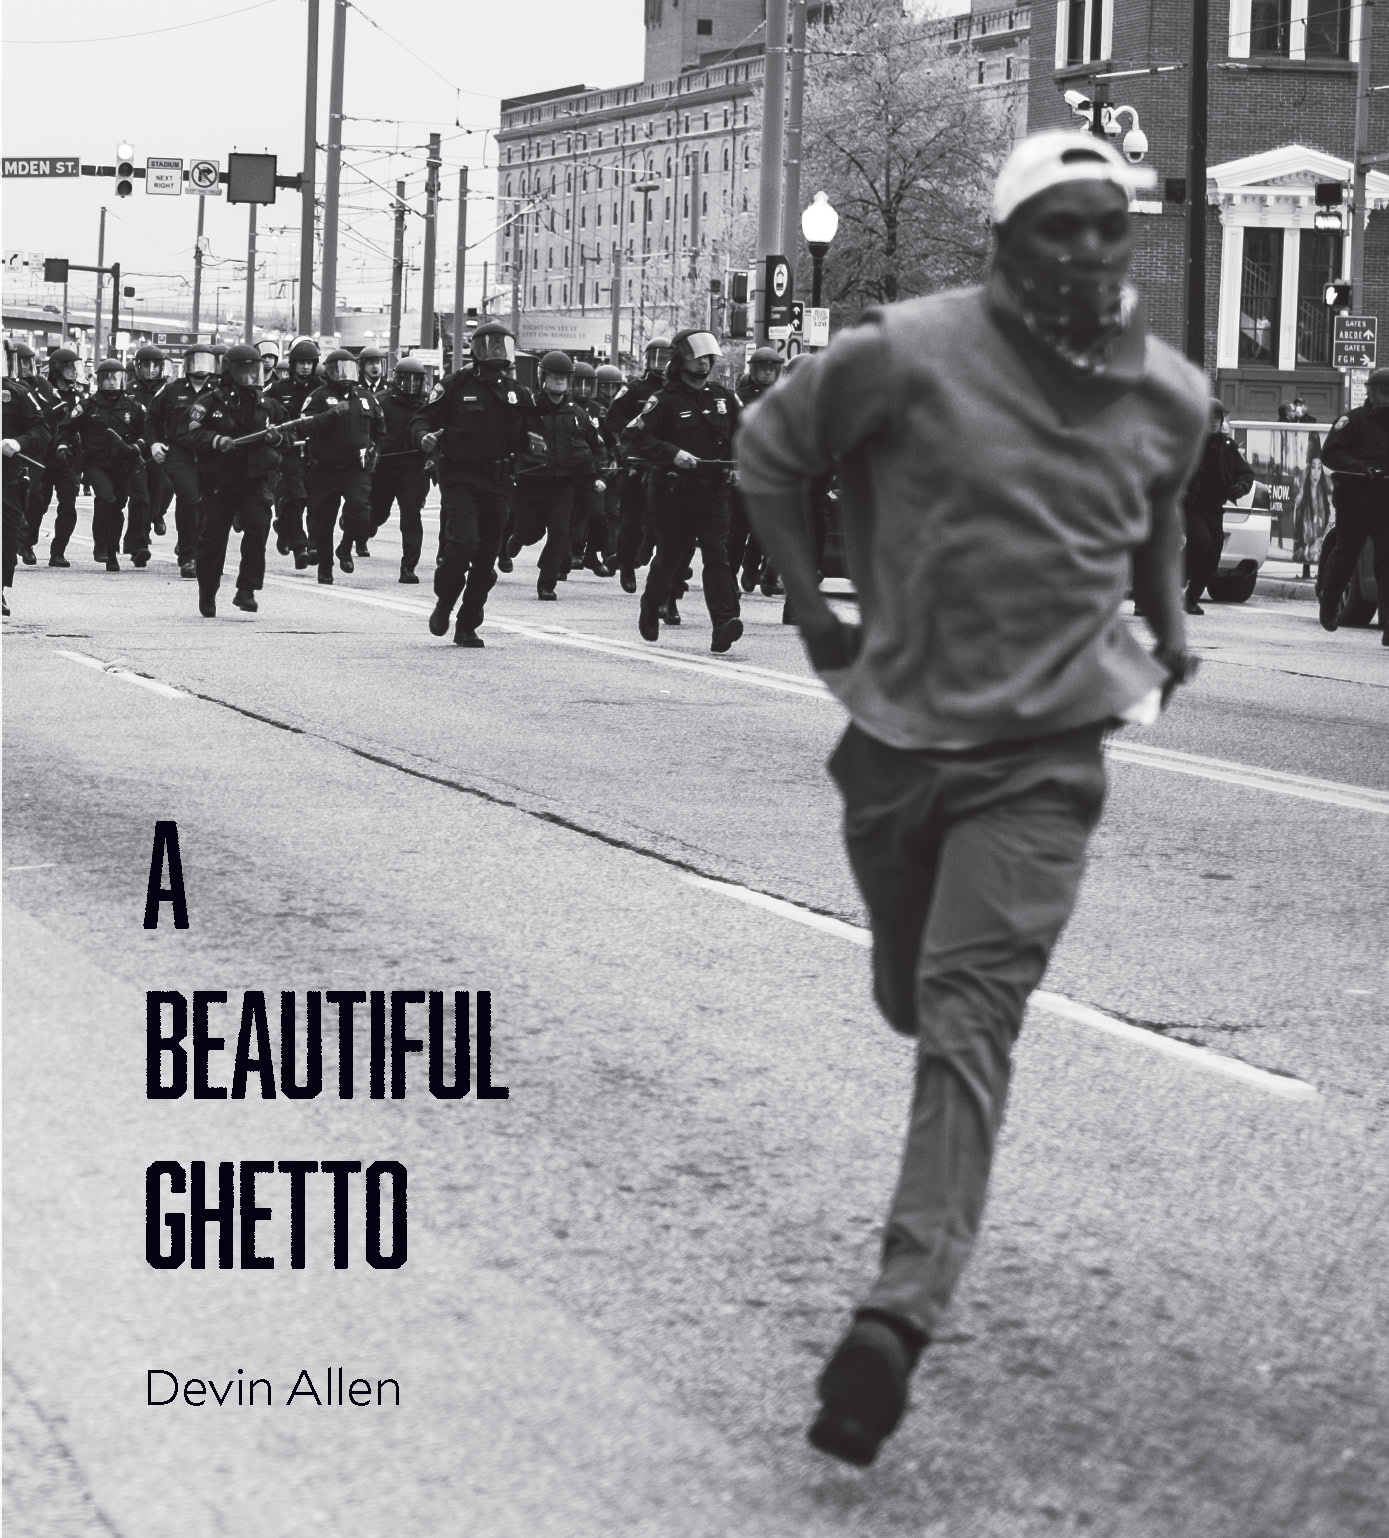 Devin Allen’s photographs are vivid love letters to Baltimore 